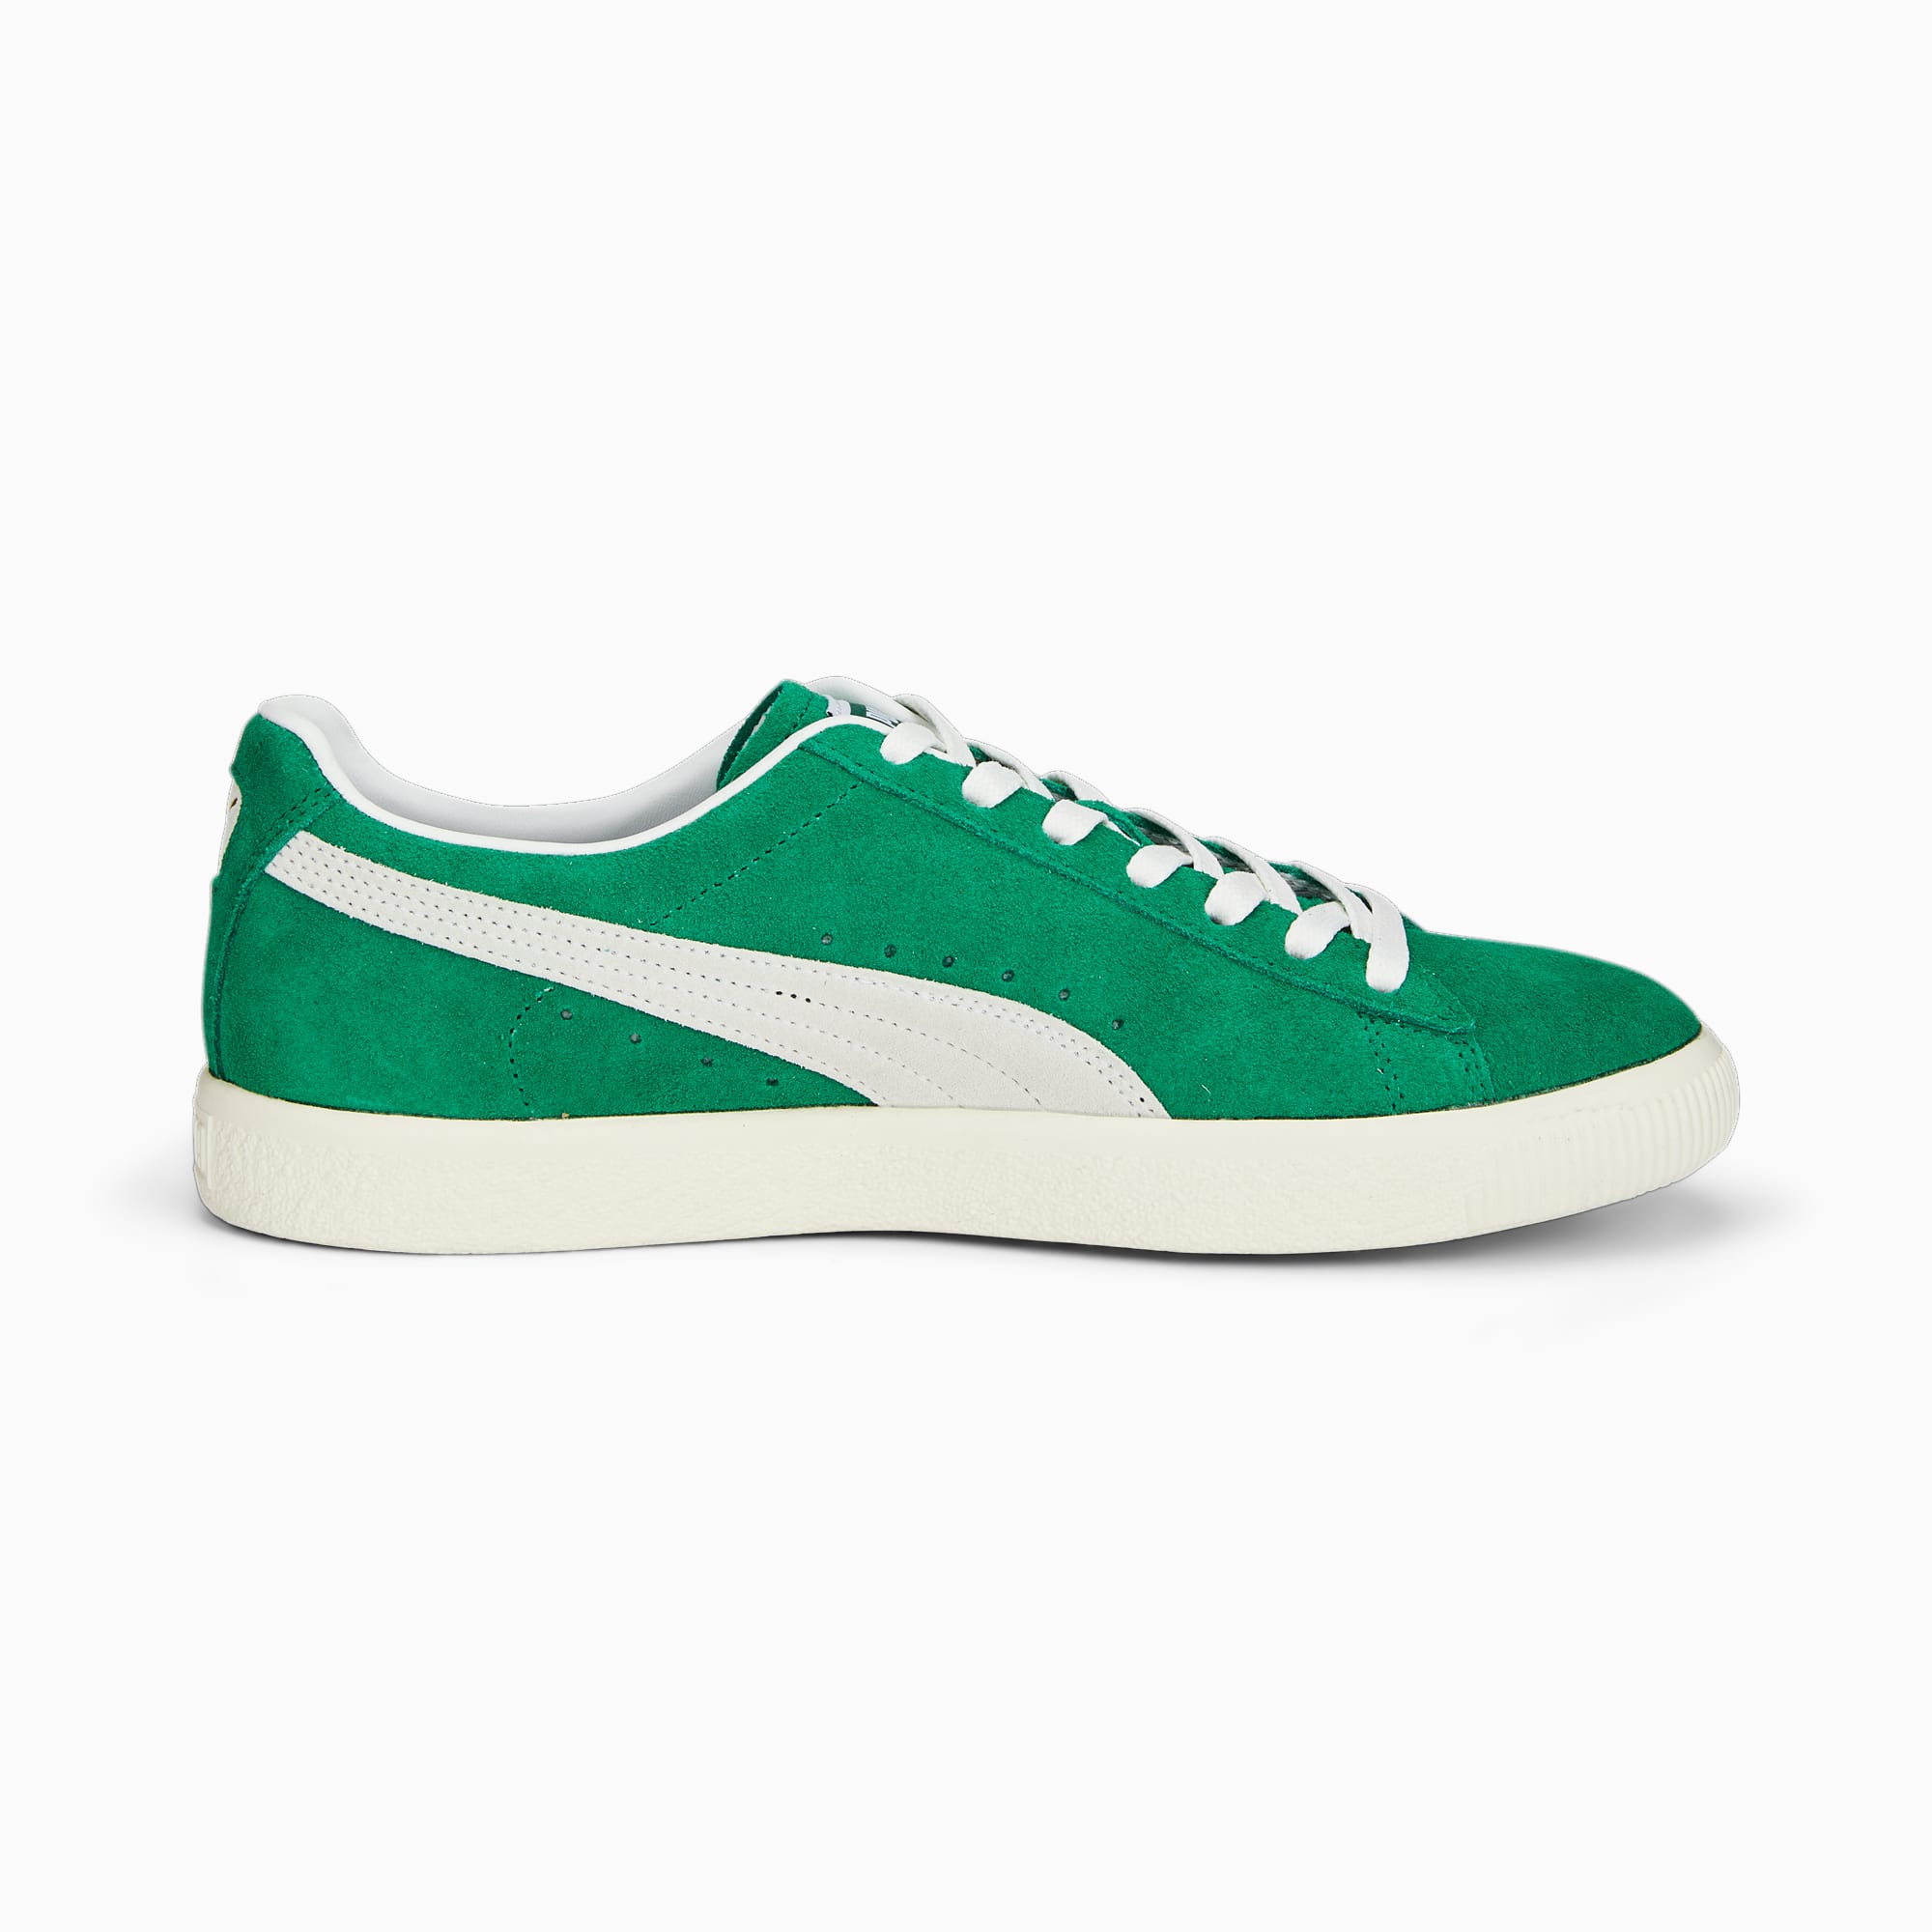 Women's PUMA Clyde OG Sneakers, Verdant Green/White/Pristine, Size 35,5, Shoes